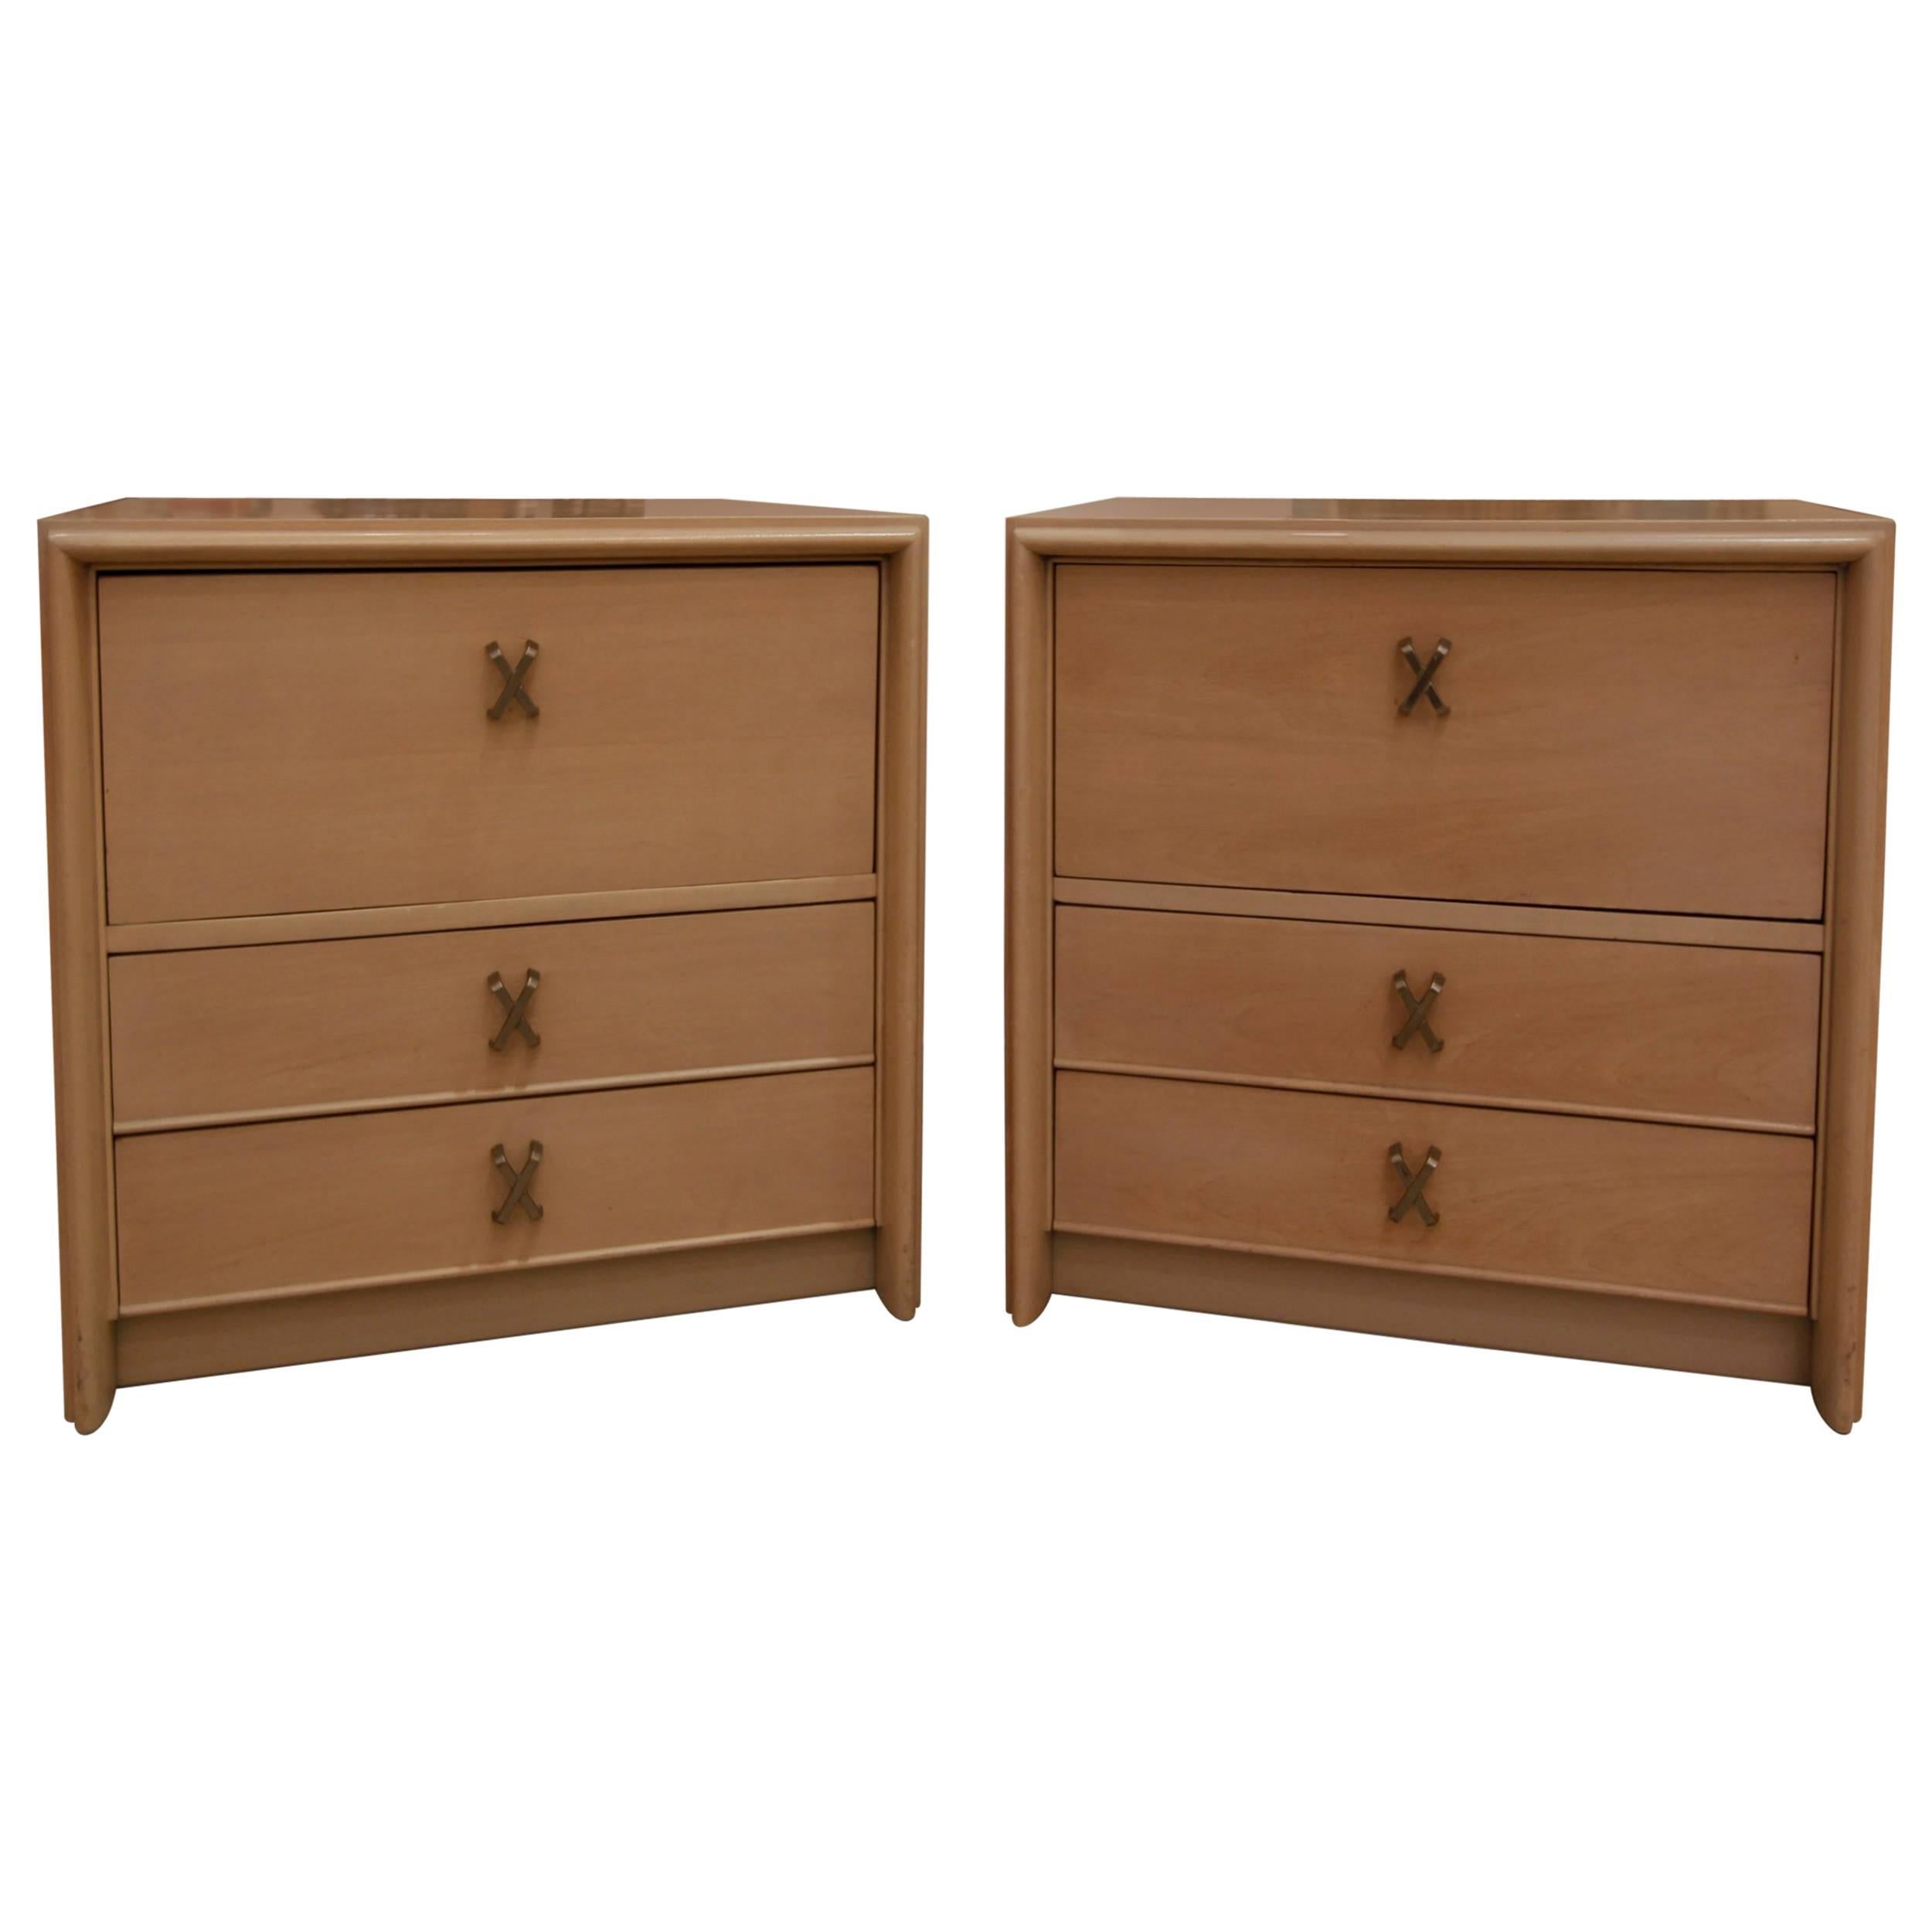 Pair of Paul Frankl Midcentury Modern Bedside Tables, 1950s